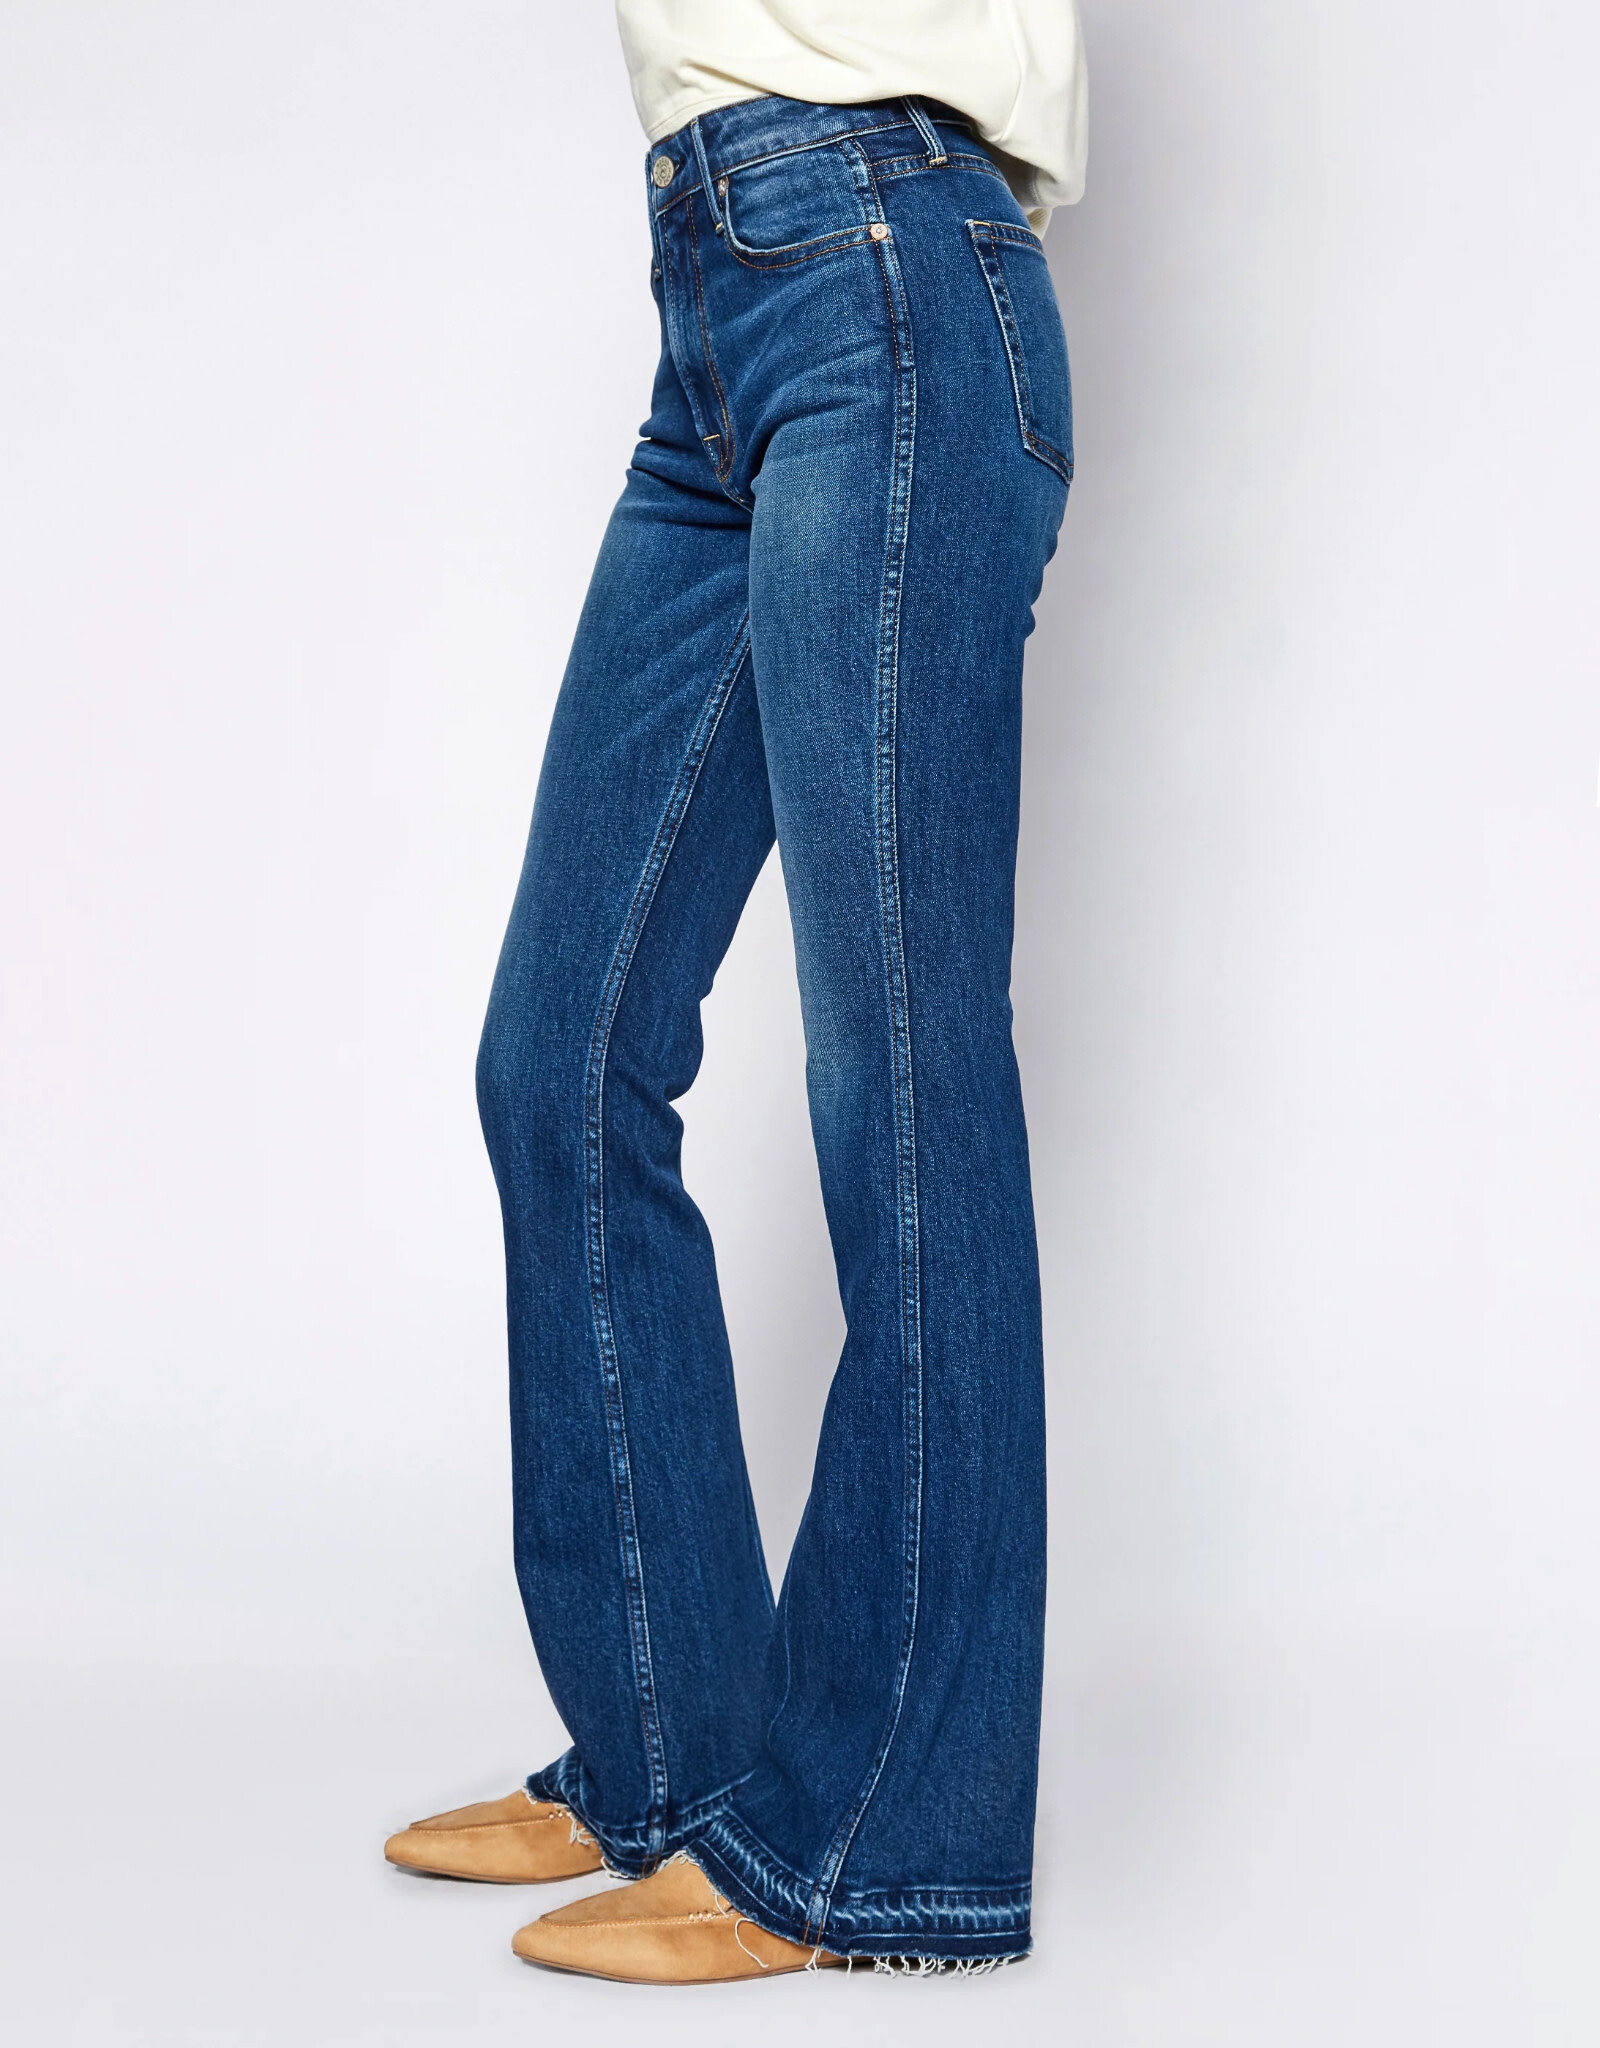 NOEND Grace Mid-Rise Flared Jeans in "Dallas"